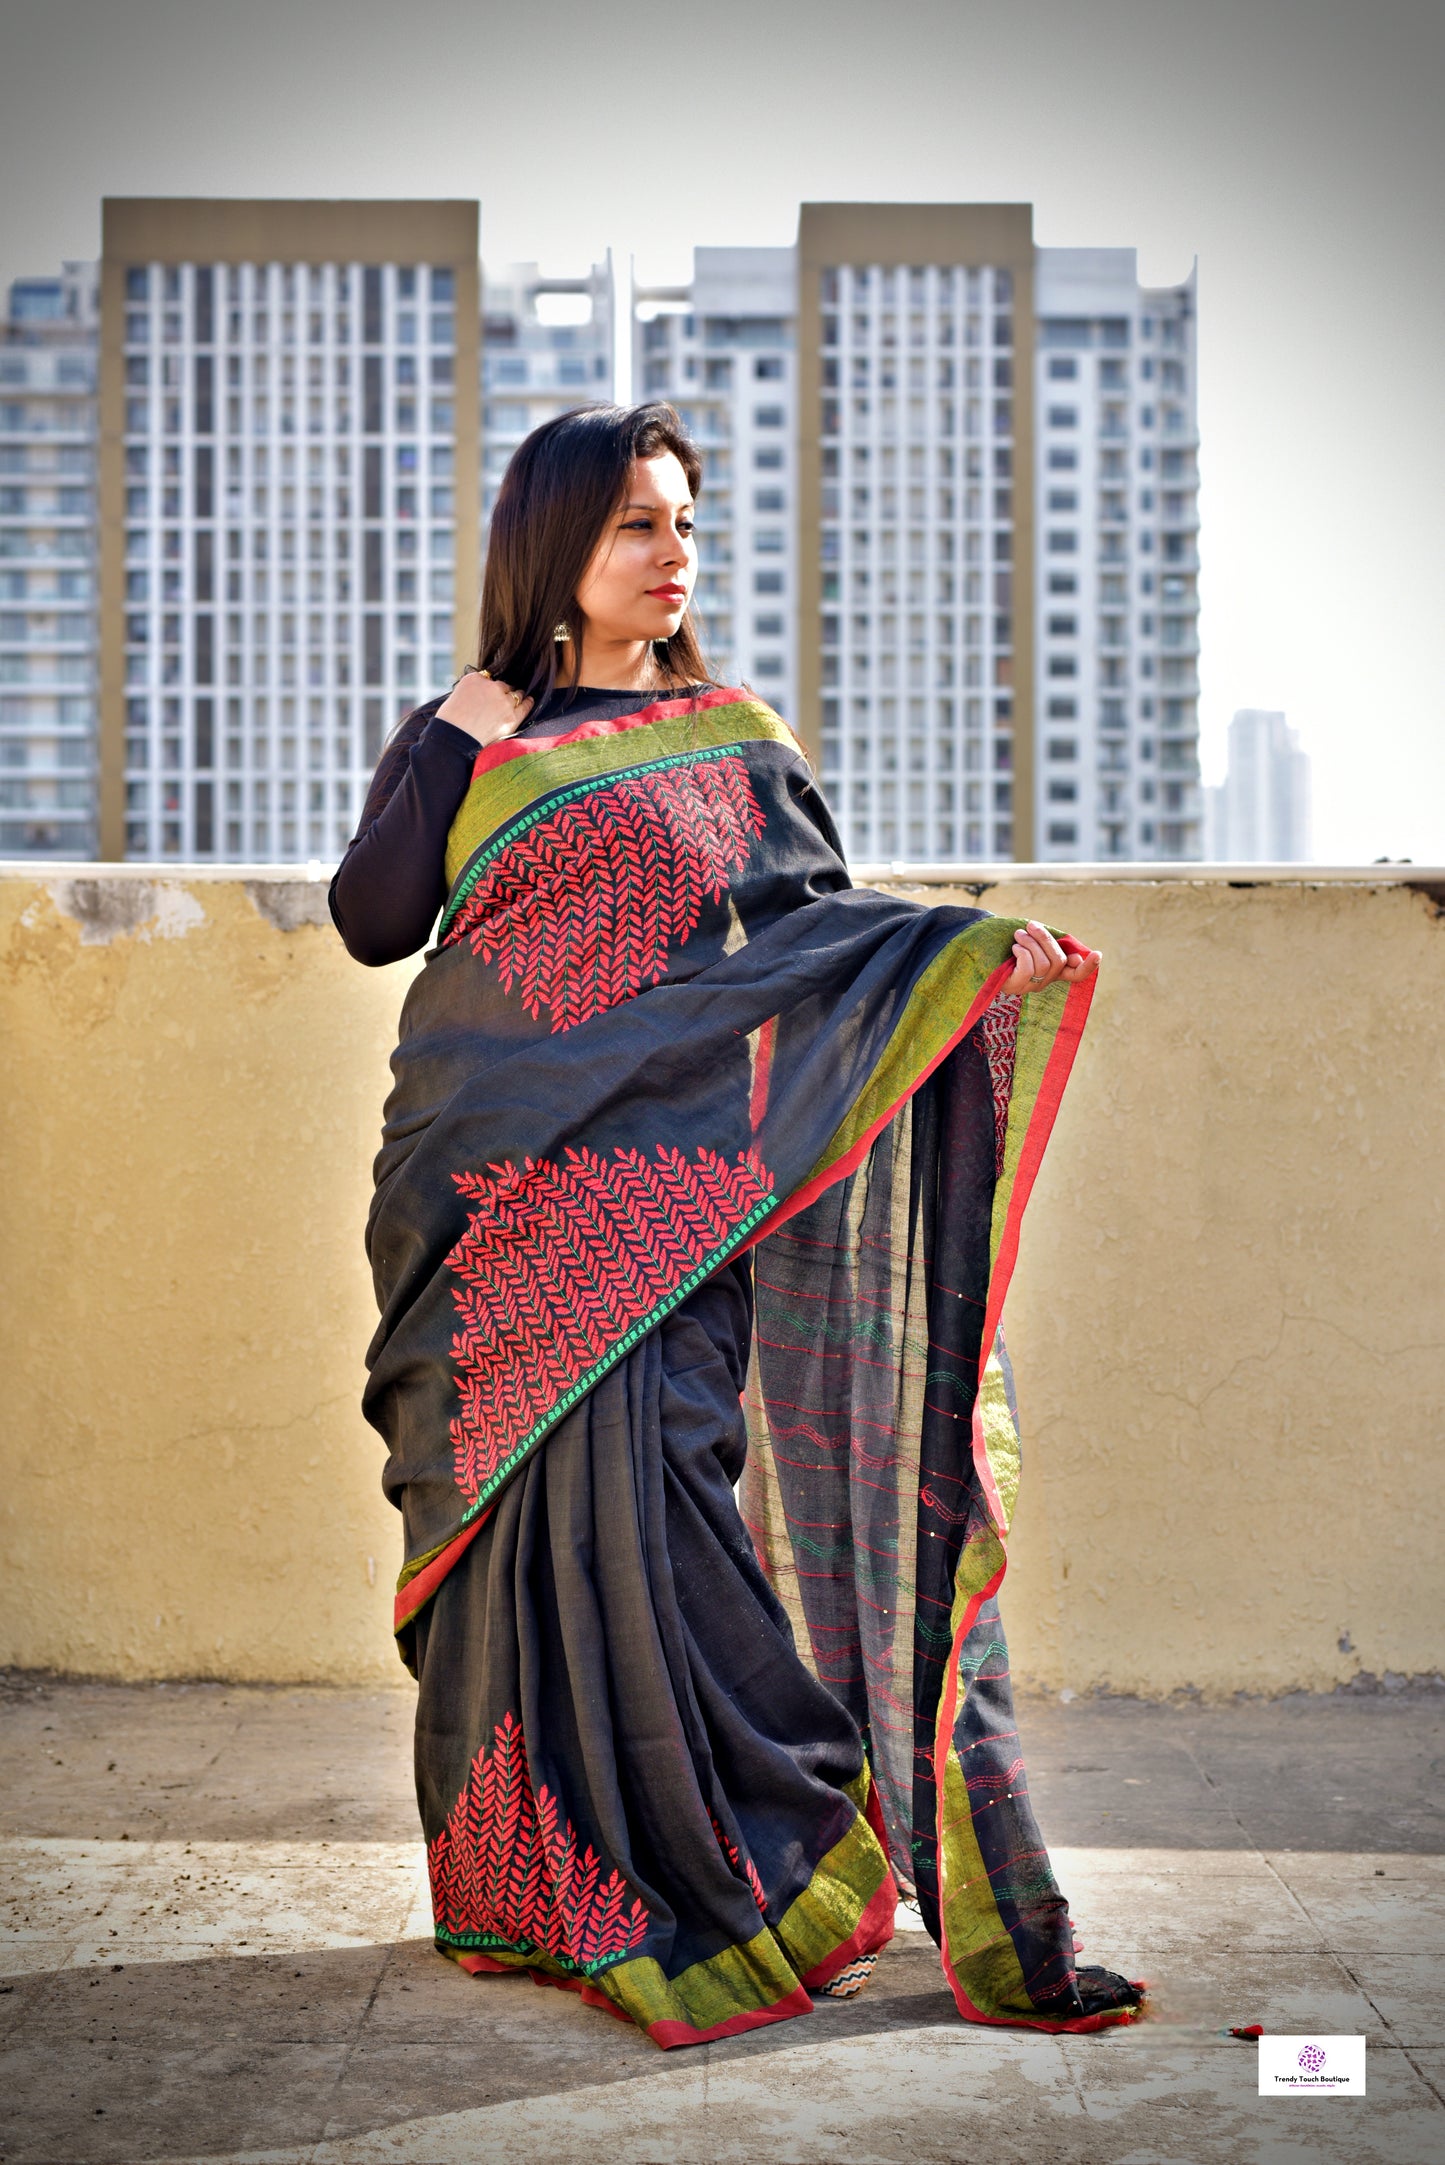 Black red Kantha hand embroidered designer mul cotton saree for office and casual styling celebration best price summer fabric 